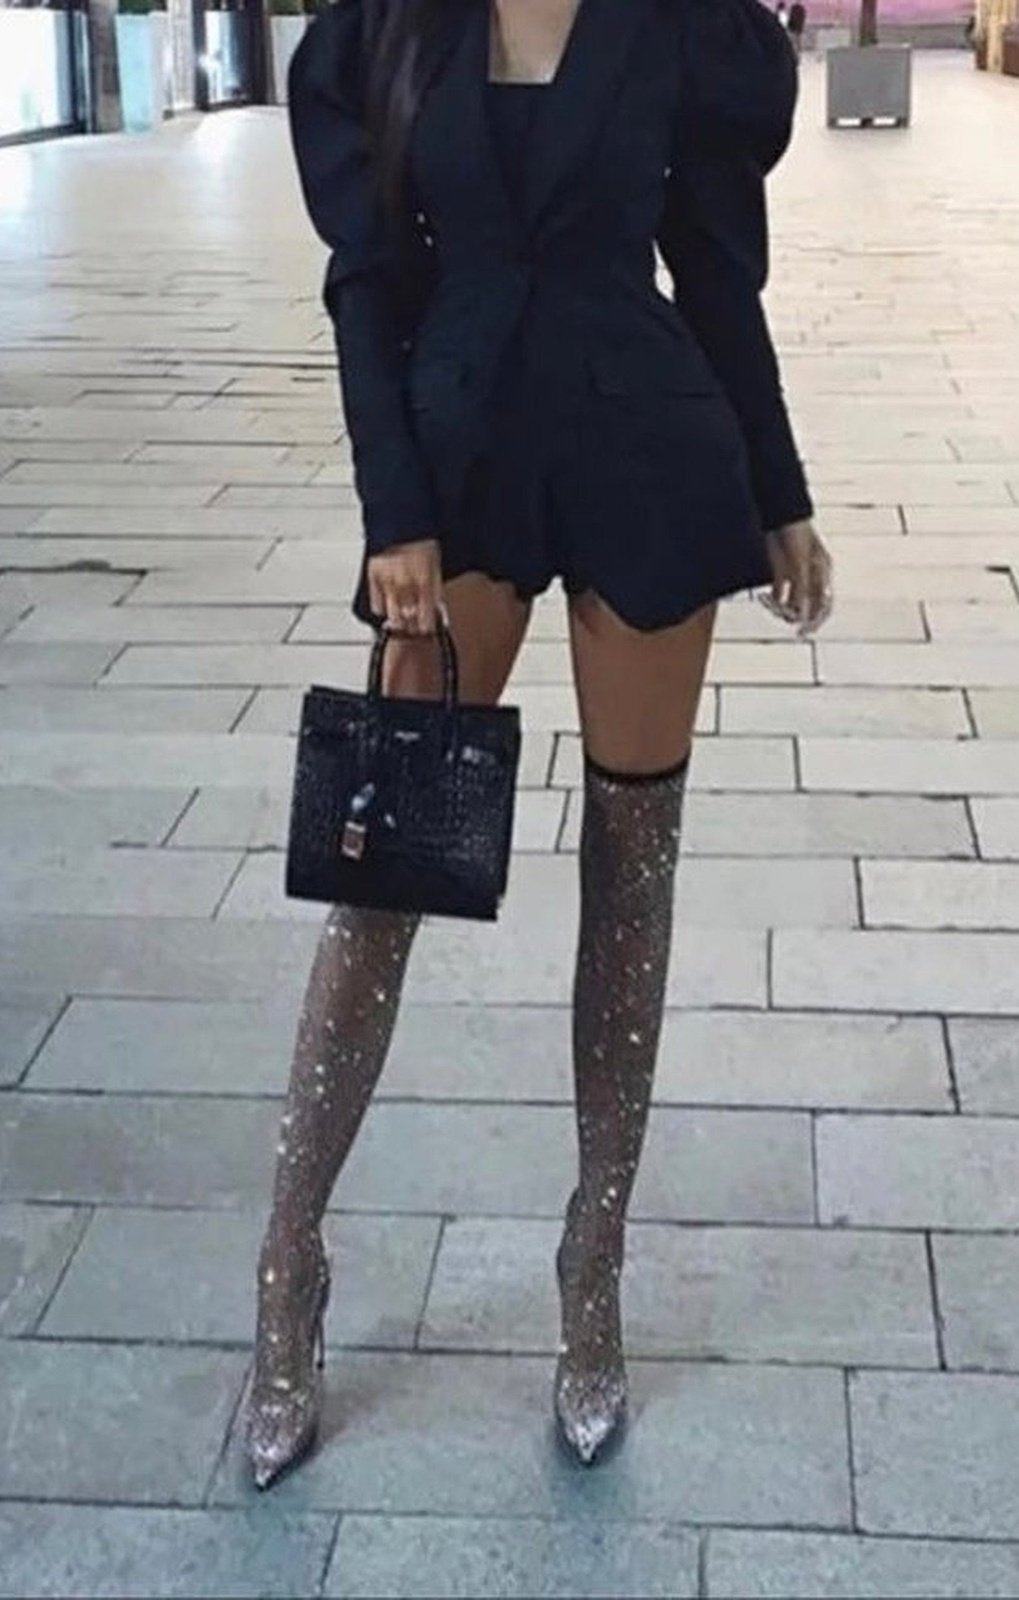 (2 Colors) Bling Crystal Thigh High Boots Sexy Pointed Toe Stiletto Heels Over The Knee Sock Shoes Women